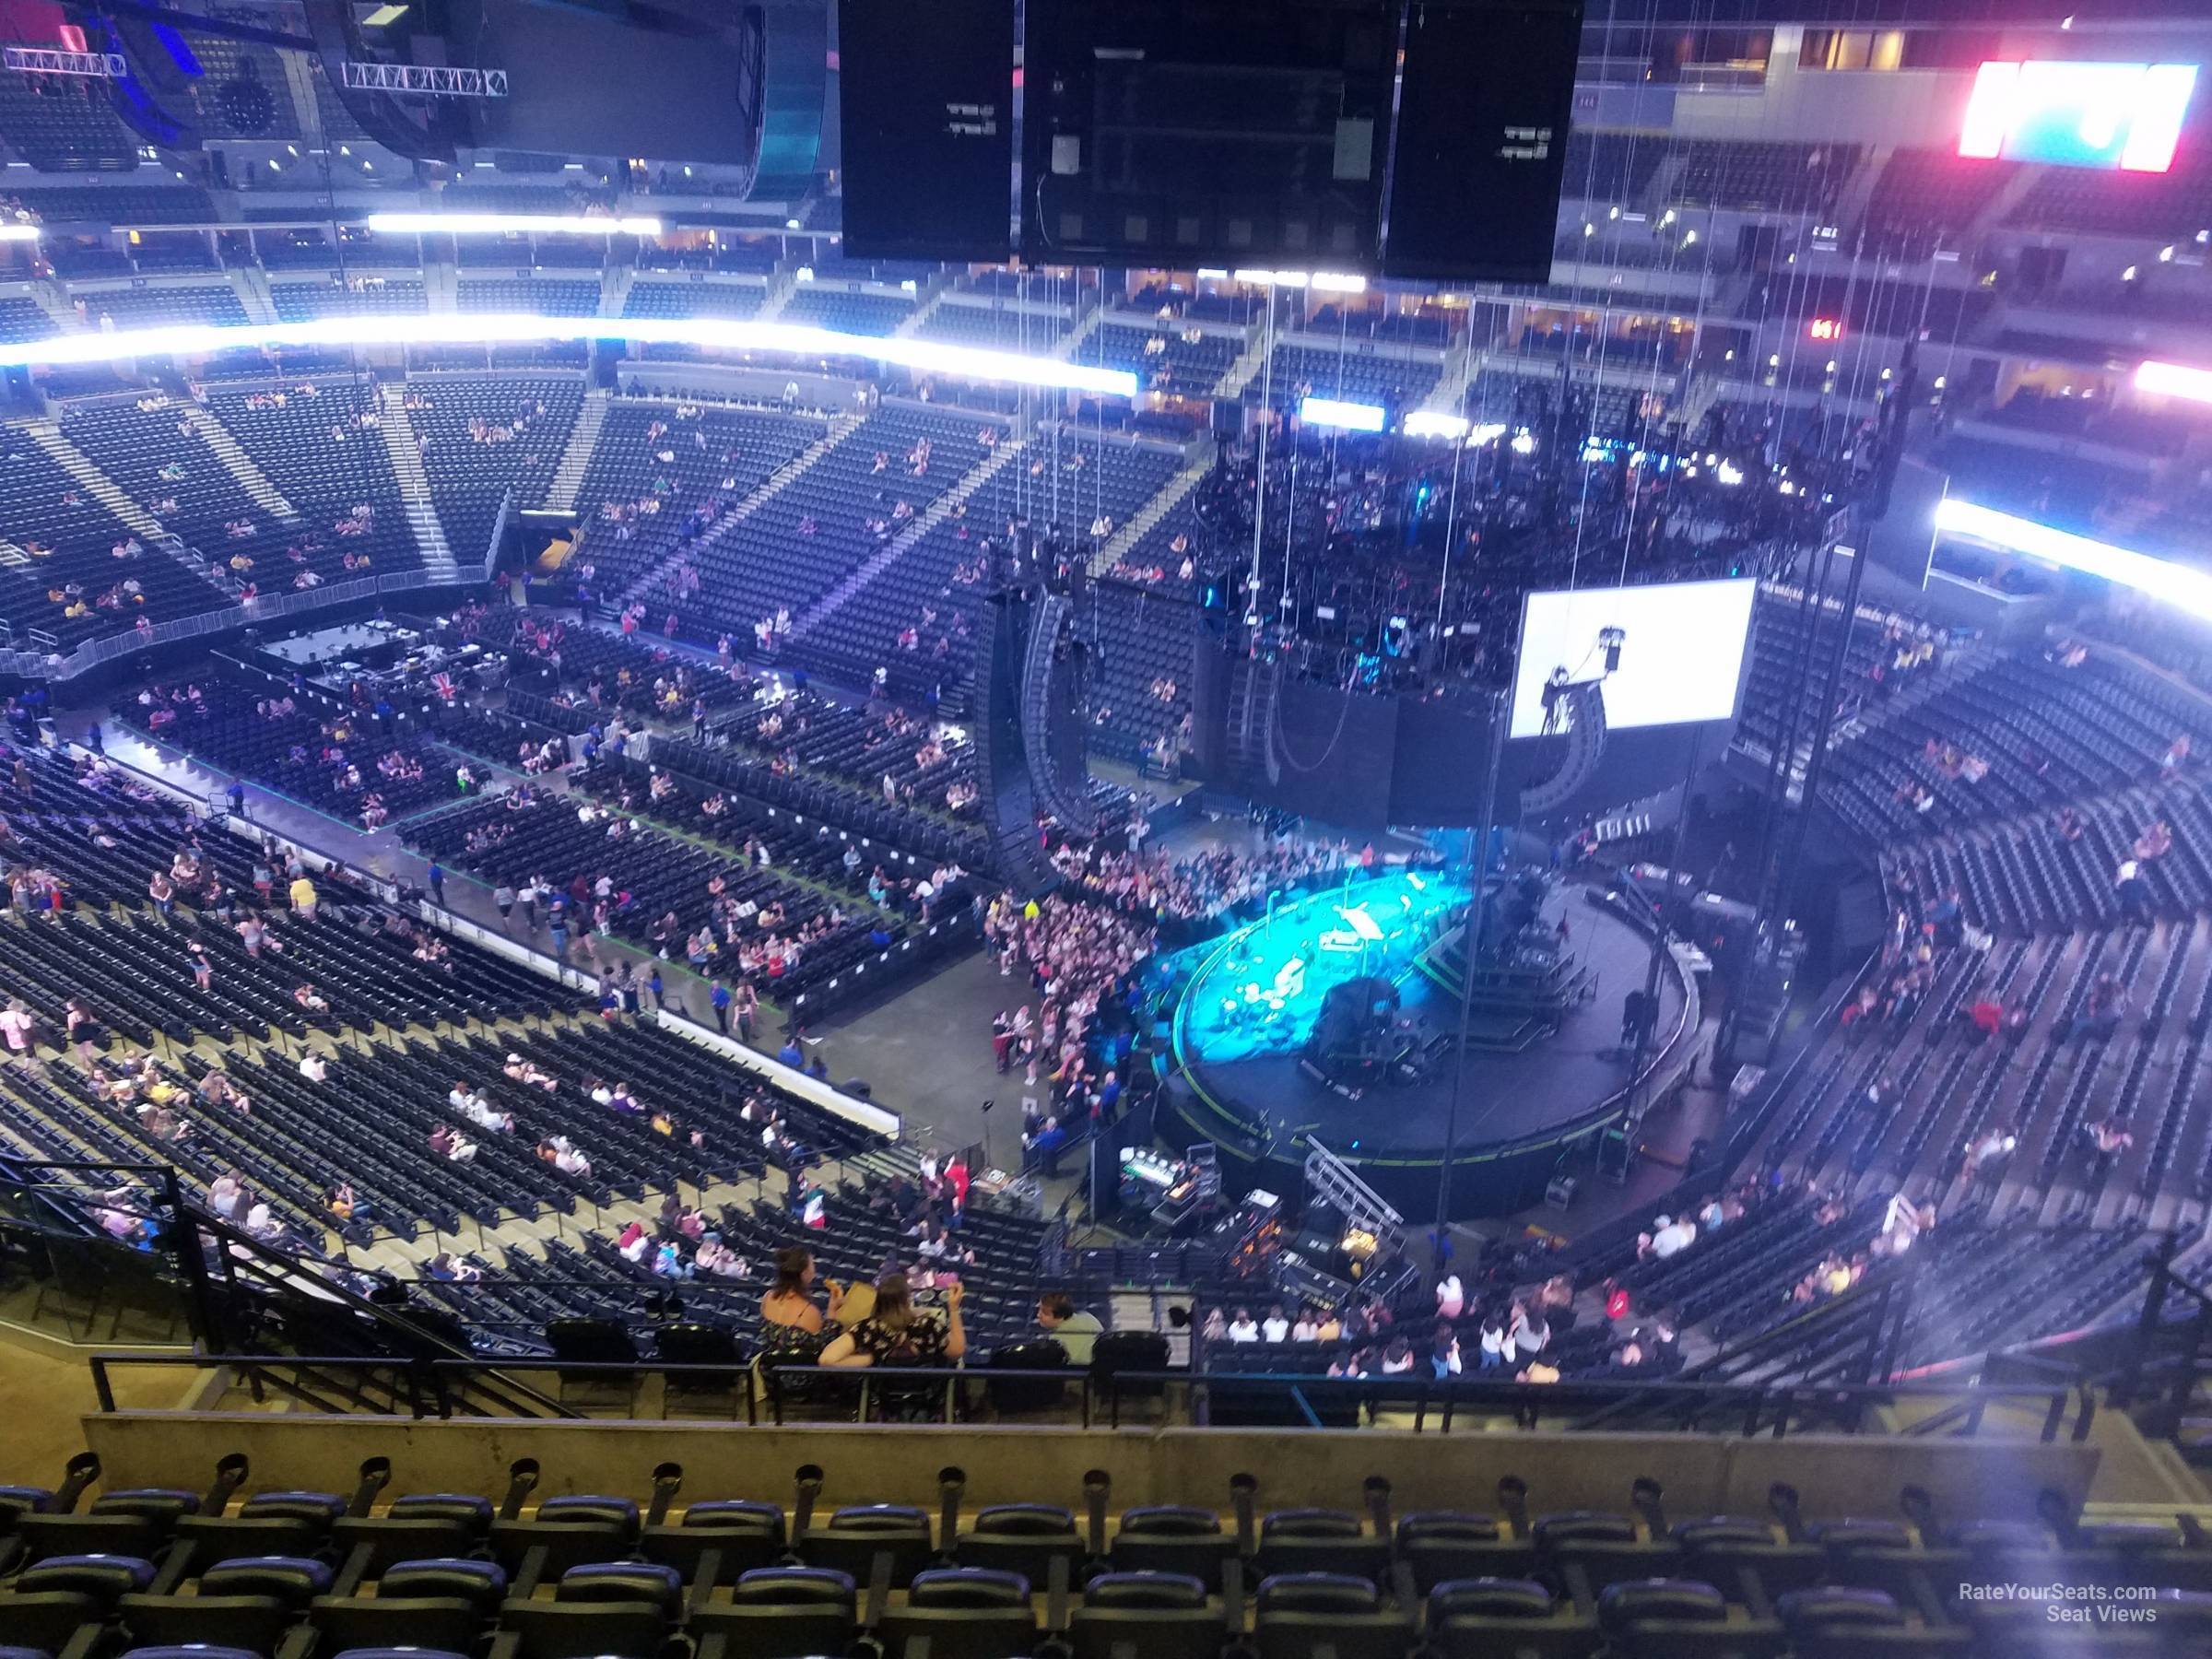 Section 372 at Pepsi Center for Concerts